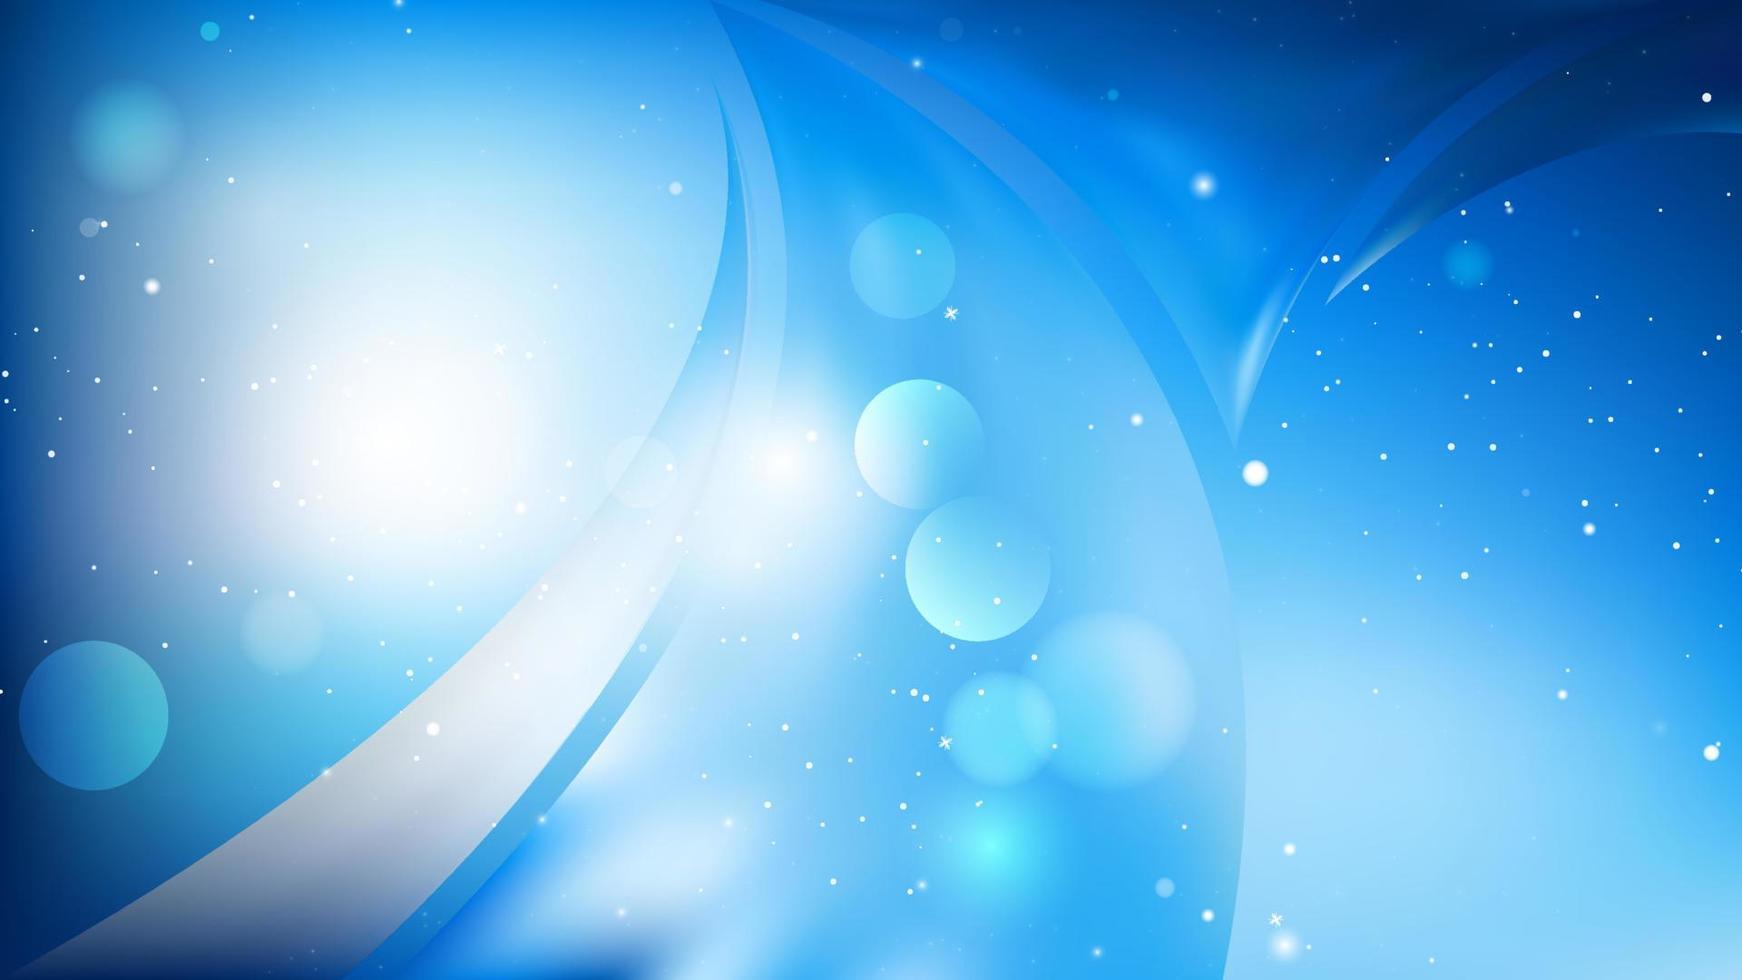 White and blue abstract background illustration wallpaper vector